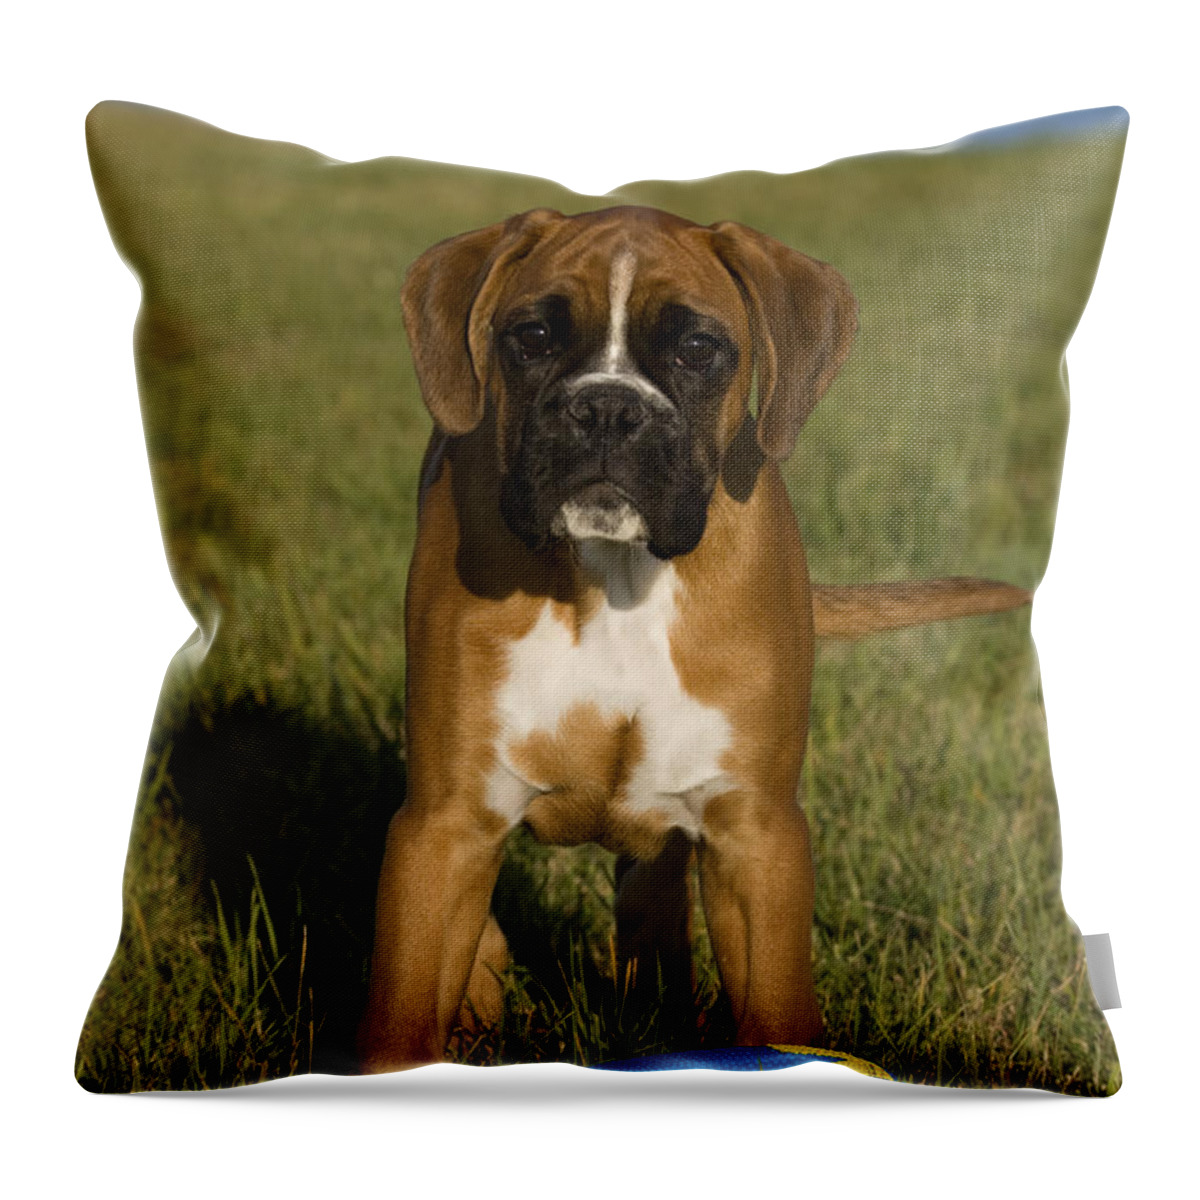 Boxer Throw Pillow featuring the photograph Boxer Puppy #22 by Jean-Louis Klein & Marie-Luce Hubert